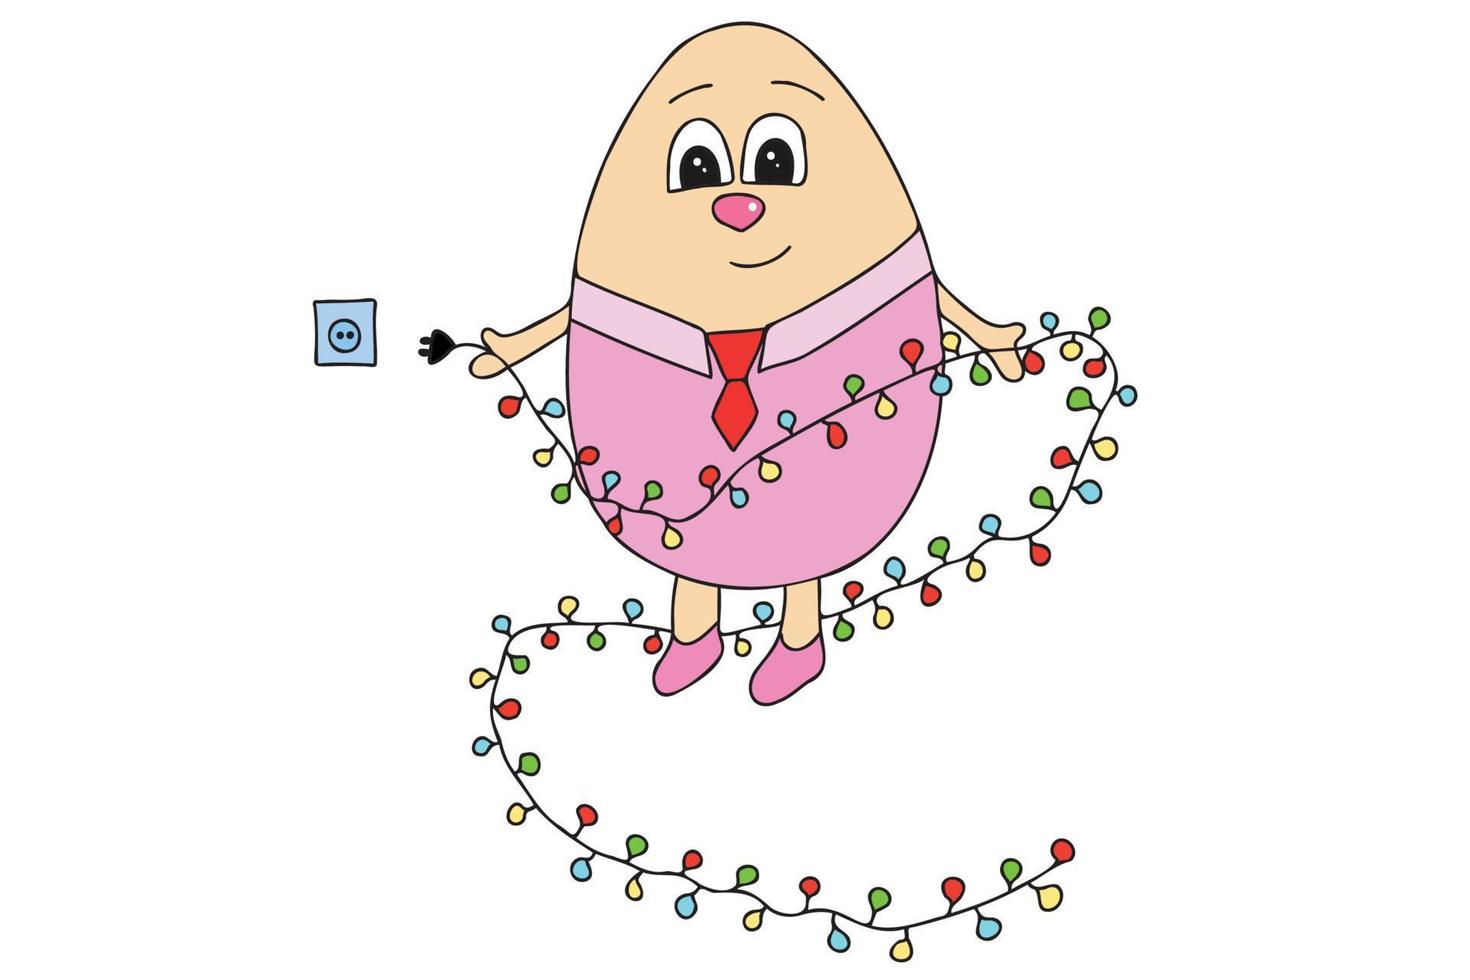 The picture shows an Easter egg with eyes, a shirt, a tie and New Year's lights in its hands. It is intended for Christmas, New Year, cards, printing, etc. vector